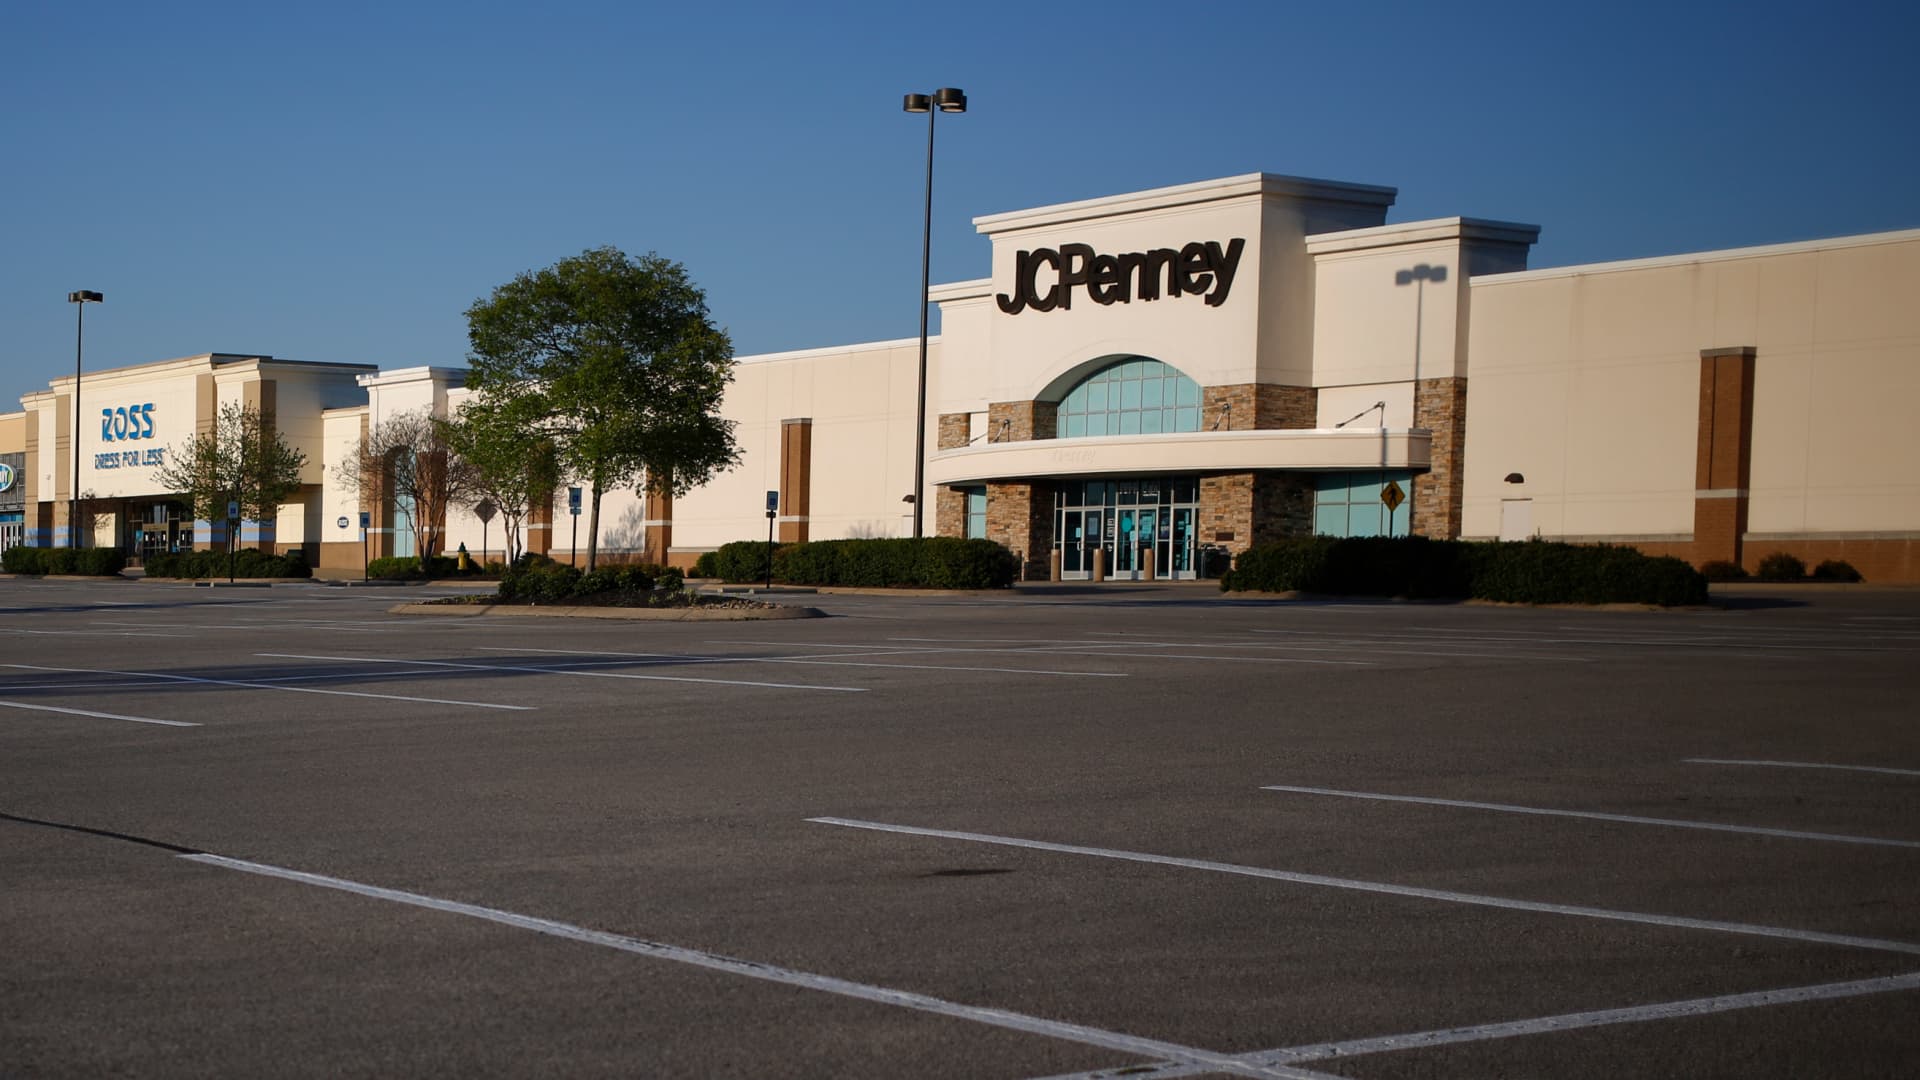 Long-struggling JC Penney files for bankruptcy as coronavirus crushes hopes for a quick turnaround